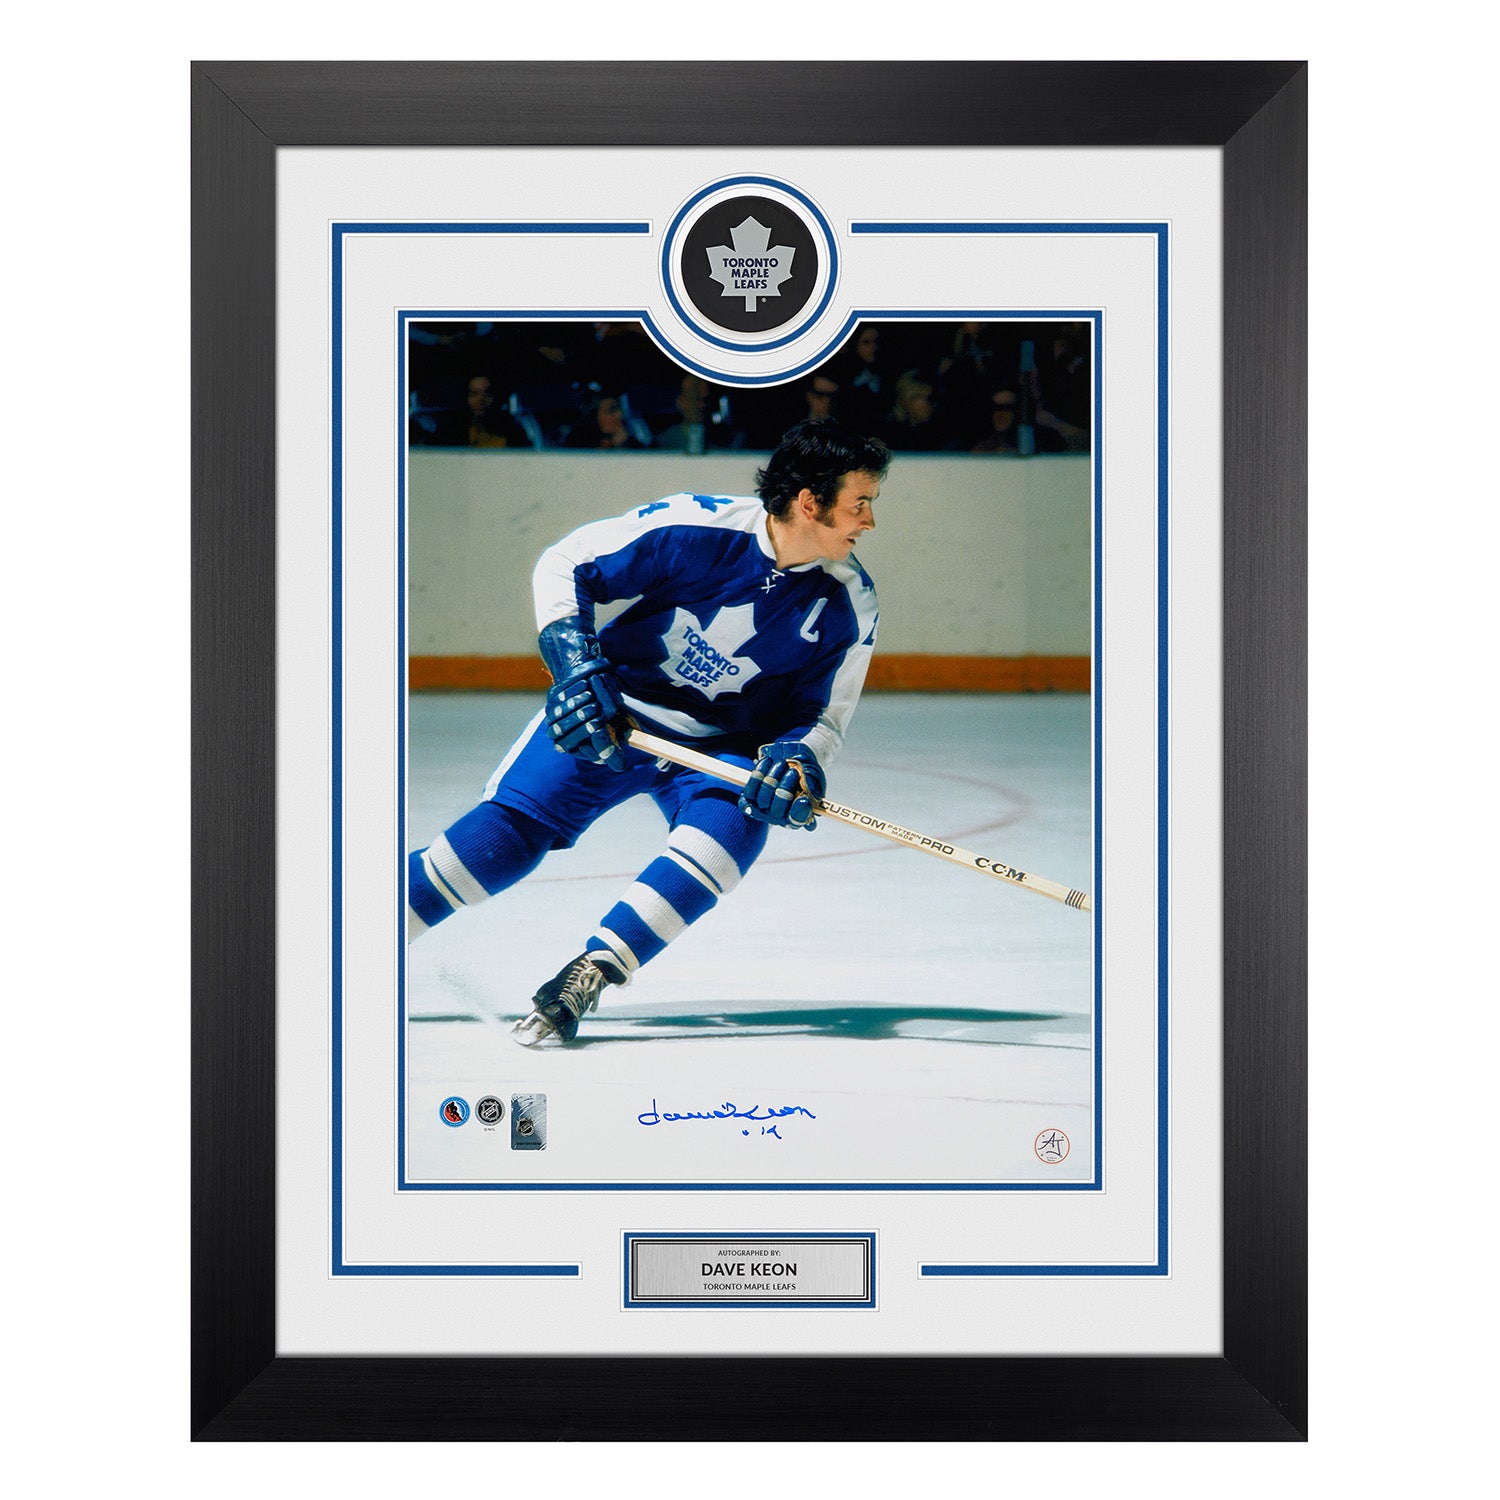 Dave Keon Autographed Toronto Maple Leafs Puck Display 26x32 Frame